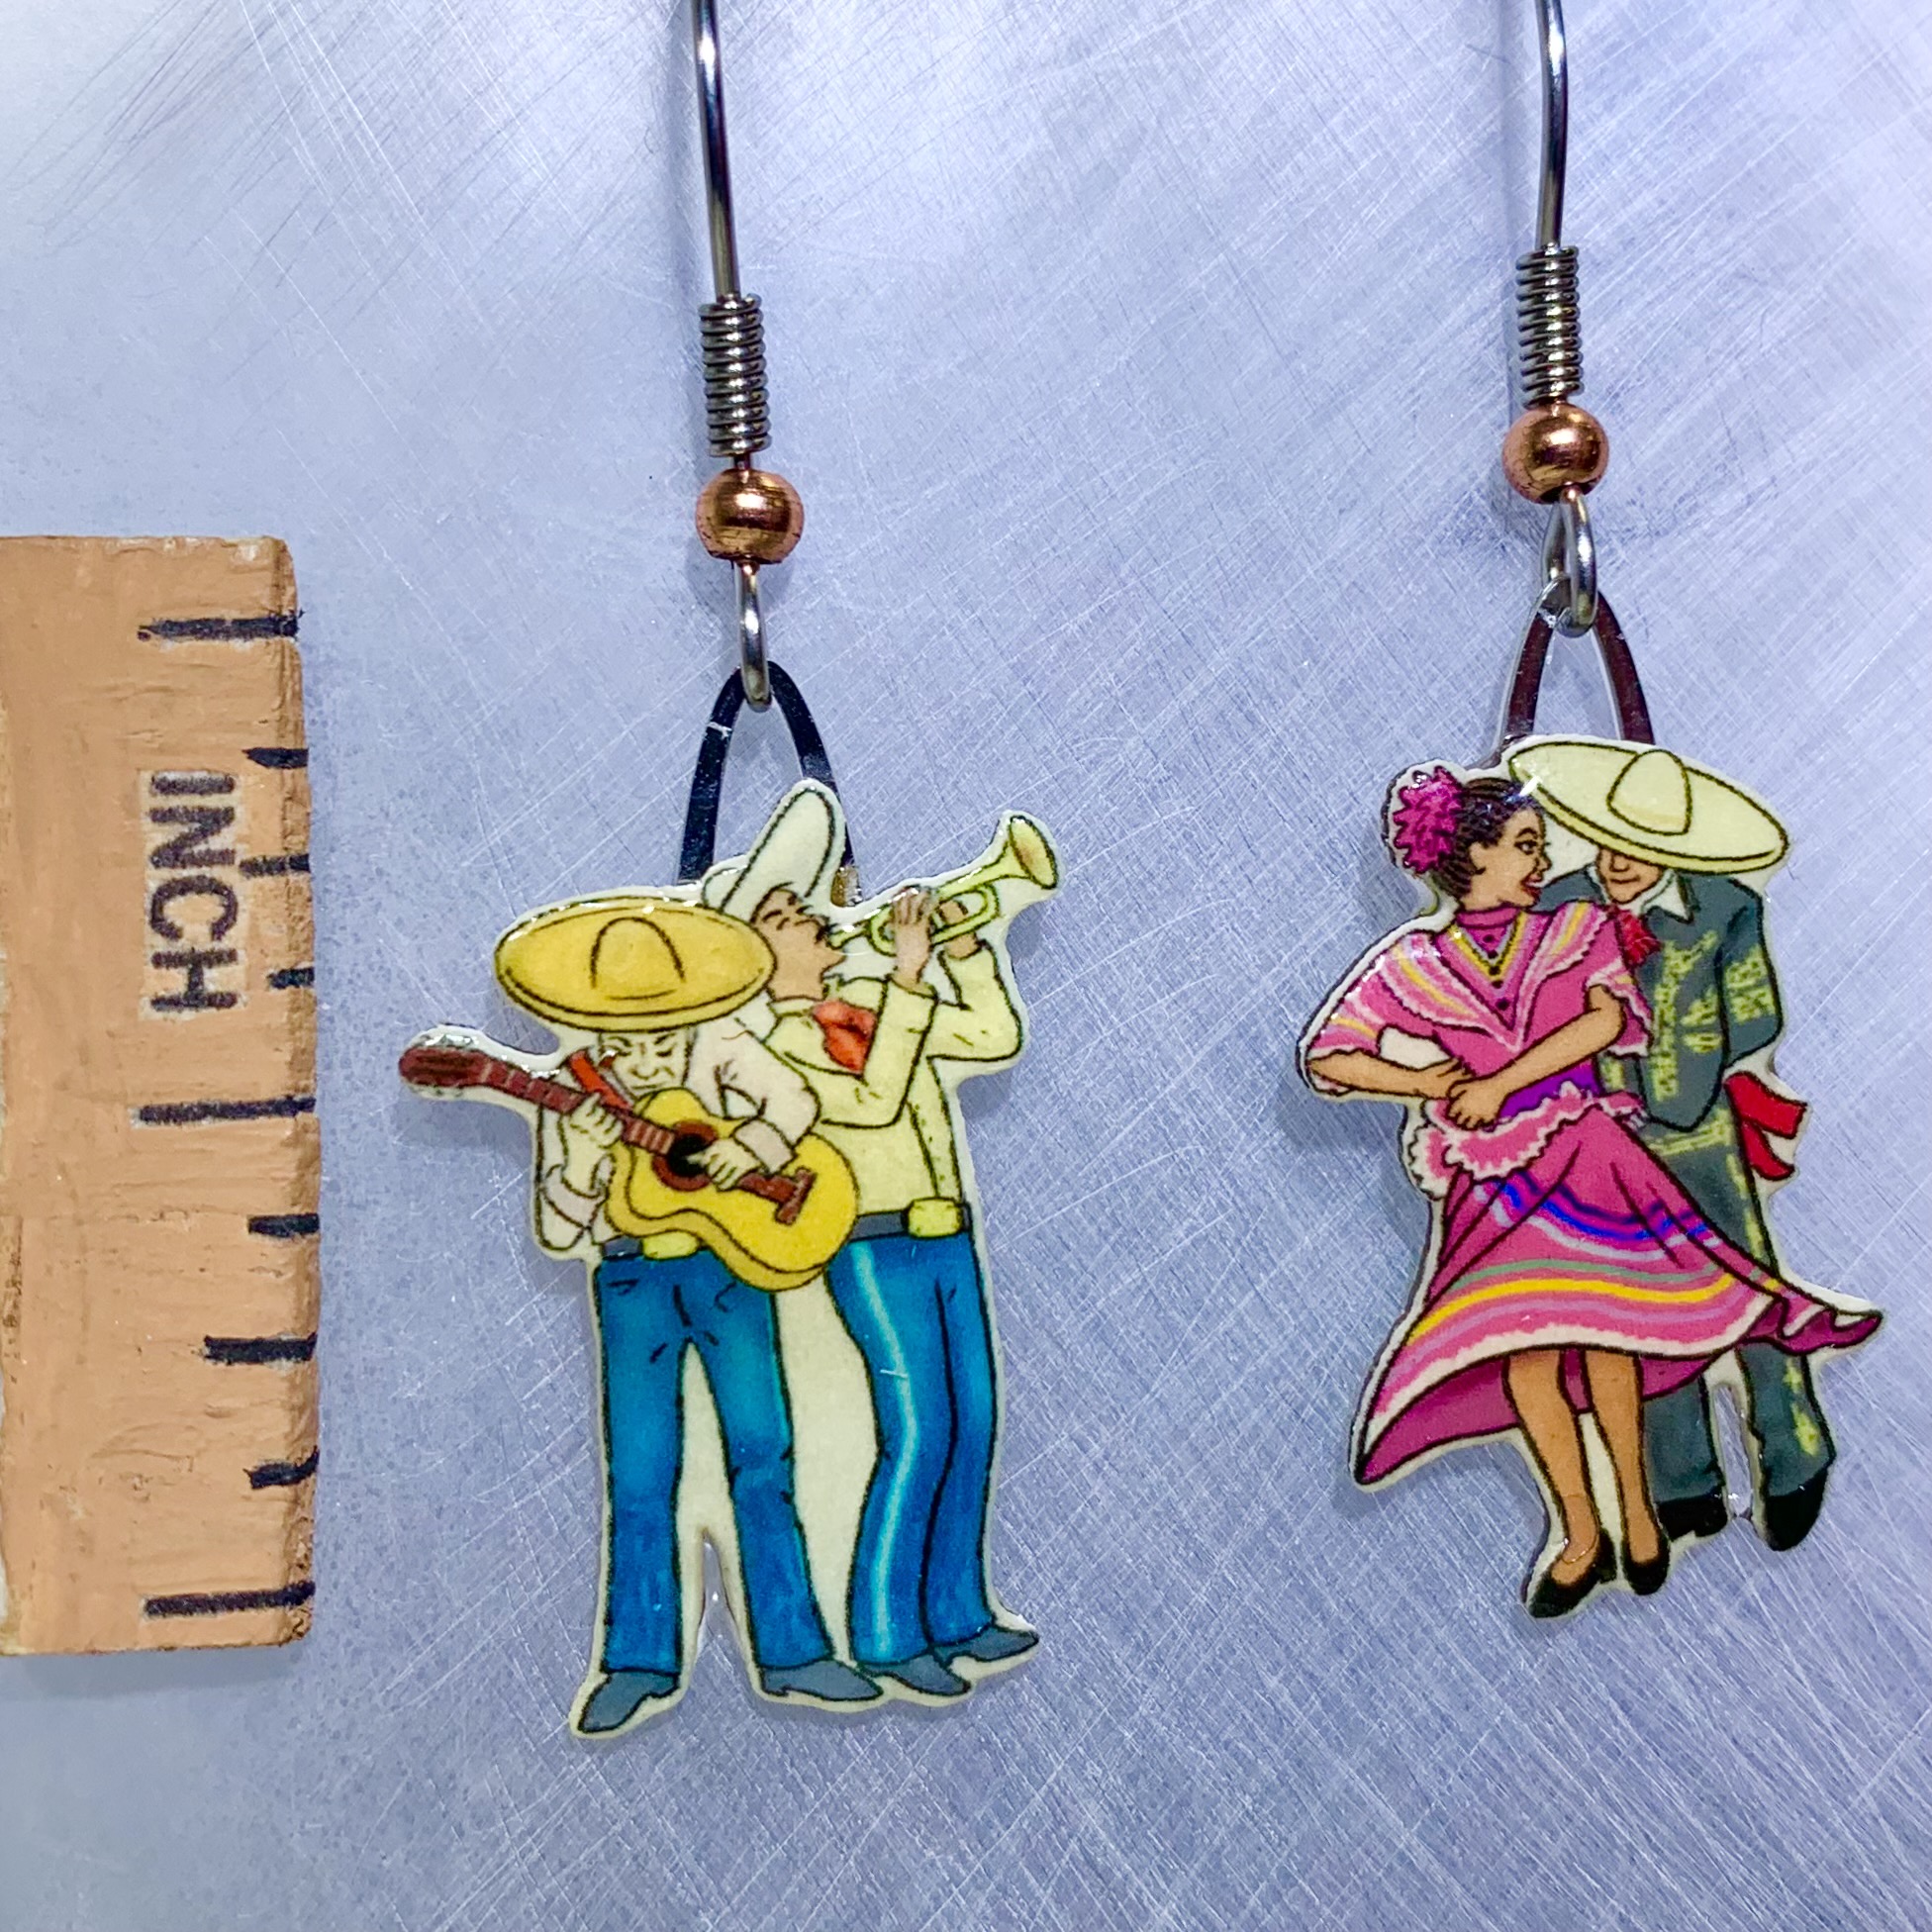 Picture shown is of 1 inch tall pair of earrings of La Fiesta.